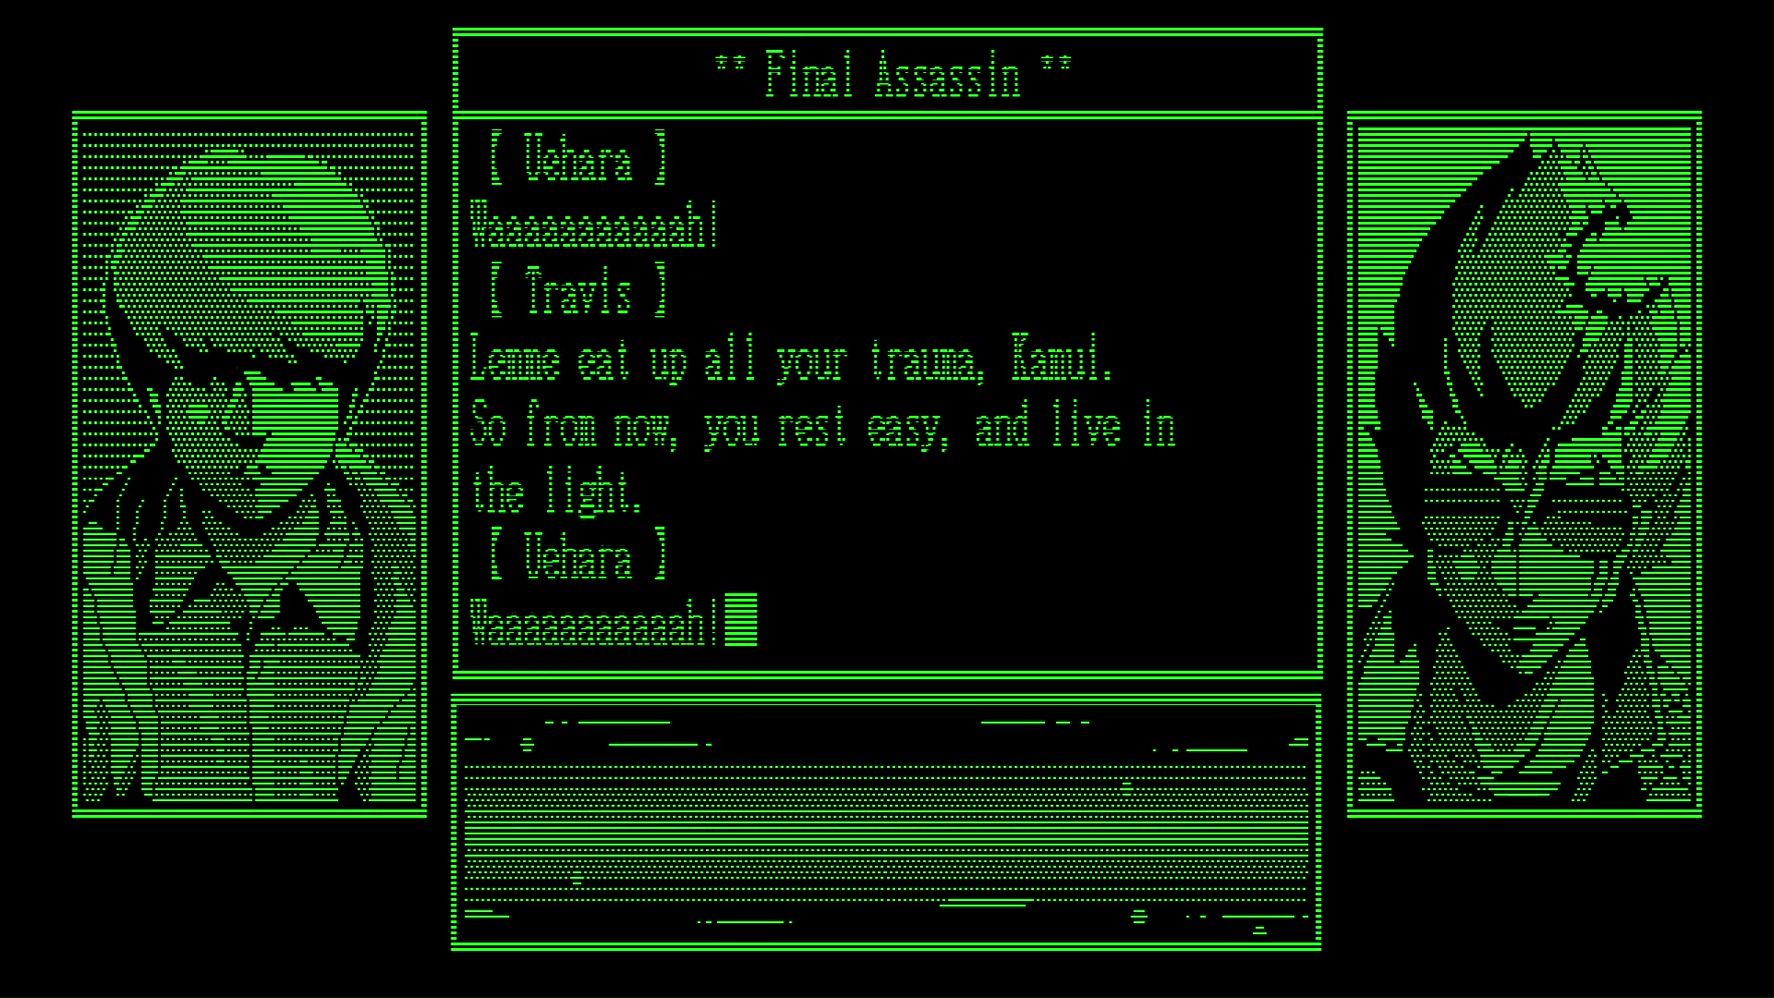 Screenshot from "Travis Strikes Back." The left portrait shows Uehara. The right portrait shows Travis. The display window shows lines suggesting a high-speed action scene. The text reads as follows:

UEHARA: Waaaaaaaaaaah!

TRAVIS: Lemme eat up all your trauma, Kamui. So from now, you rest easy, and live in the light.

UEHARA: Waaaaaaaaaaah!